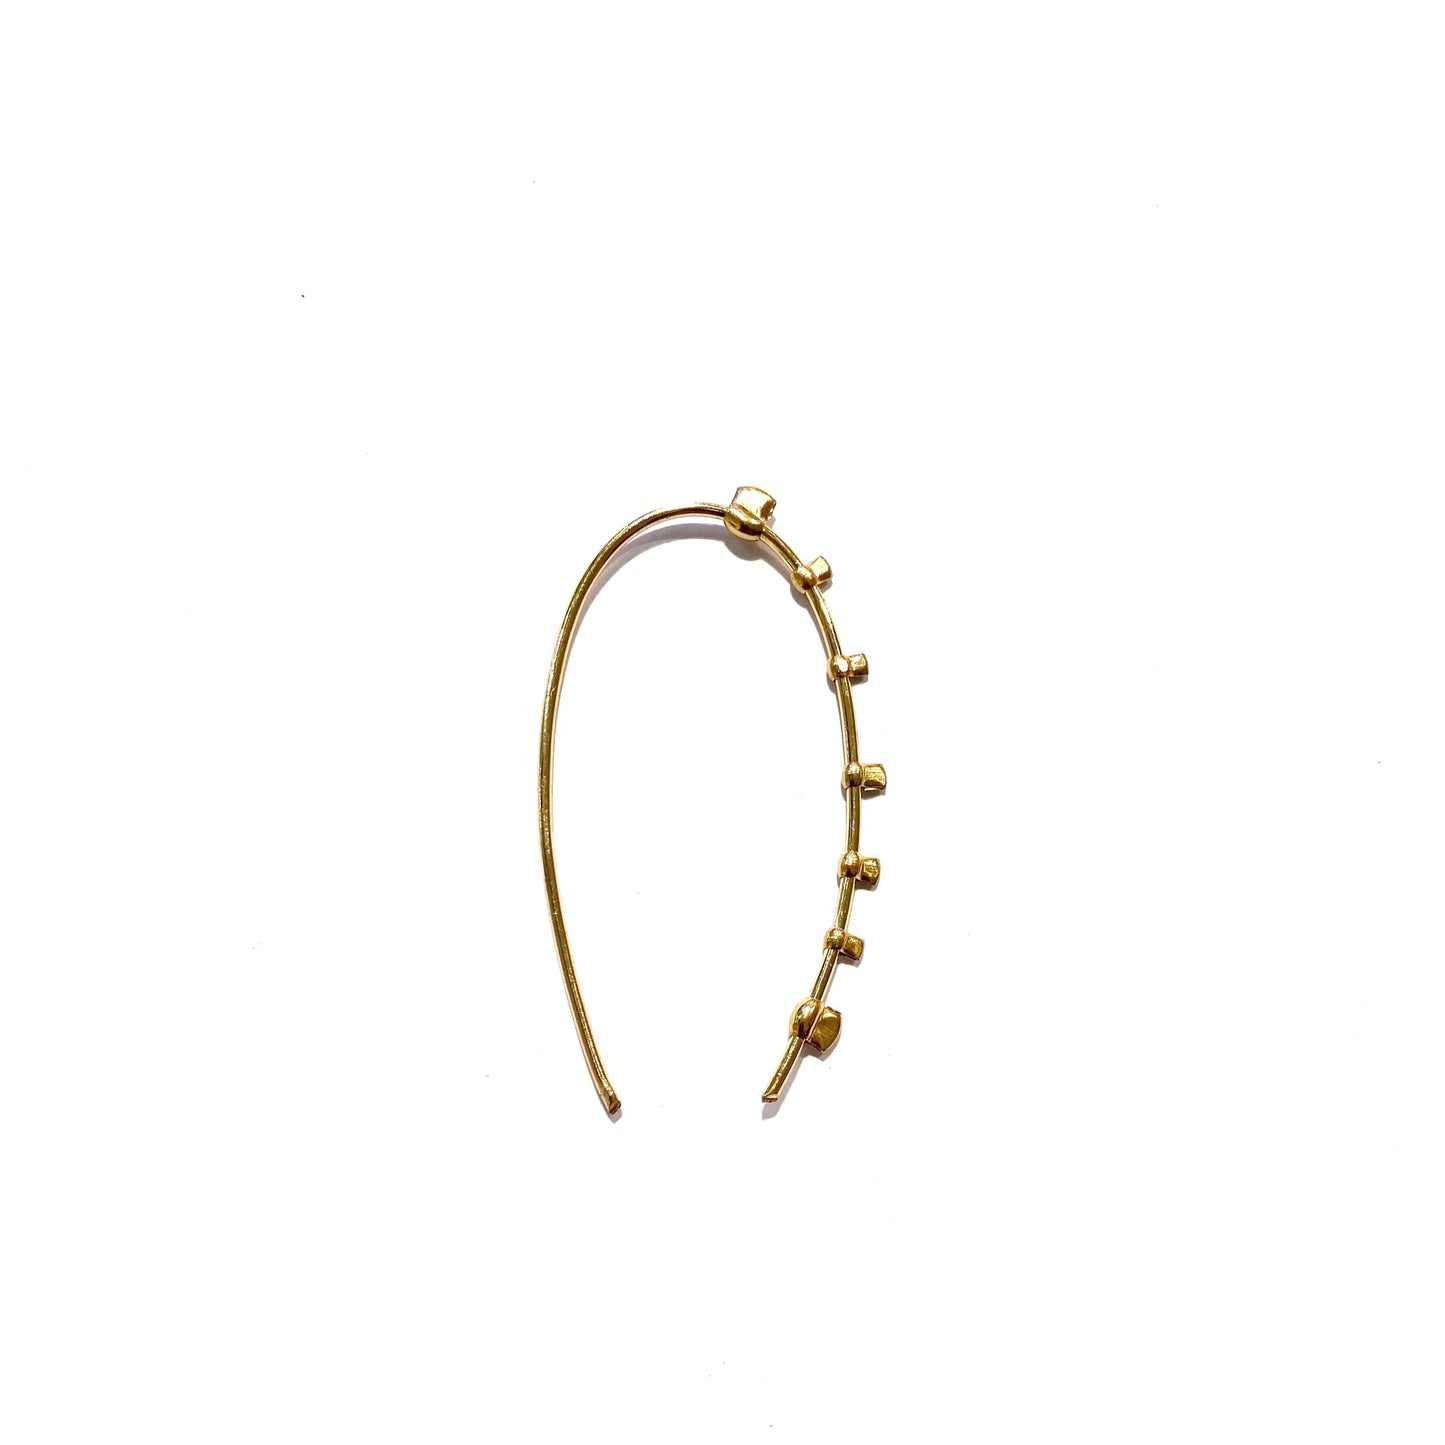 Boucle d'oreille / earring gold punky